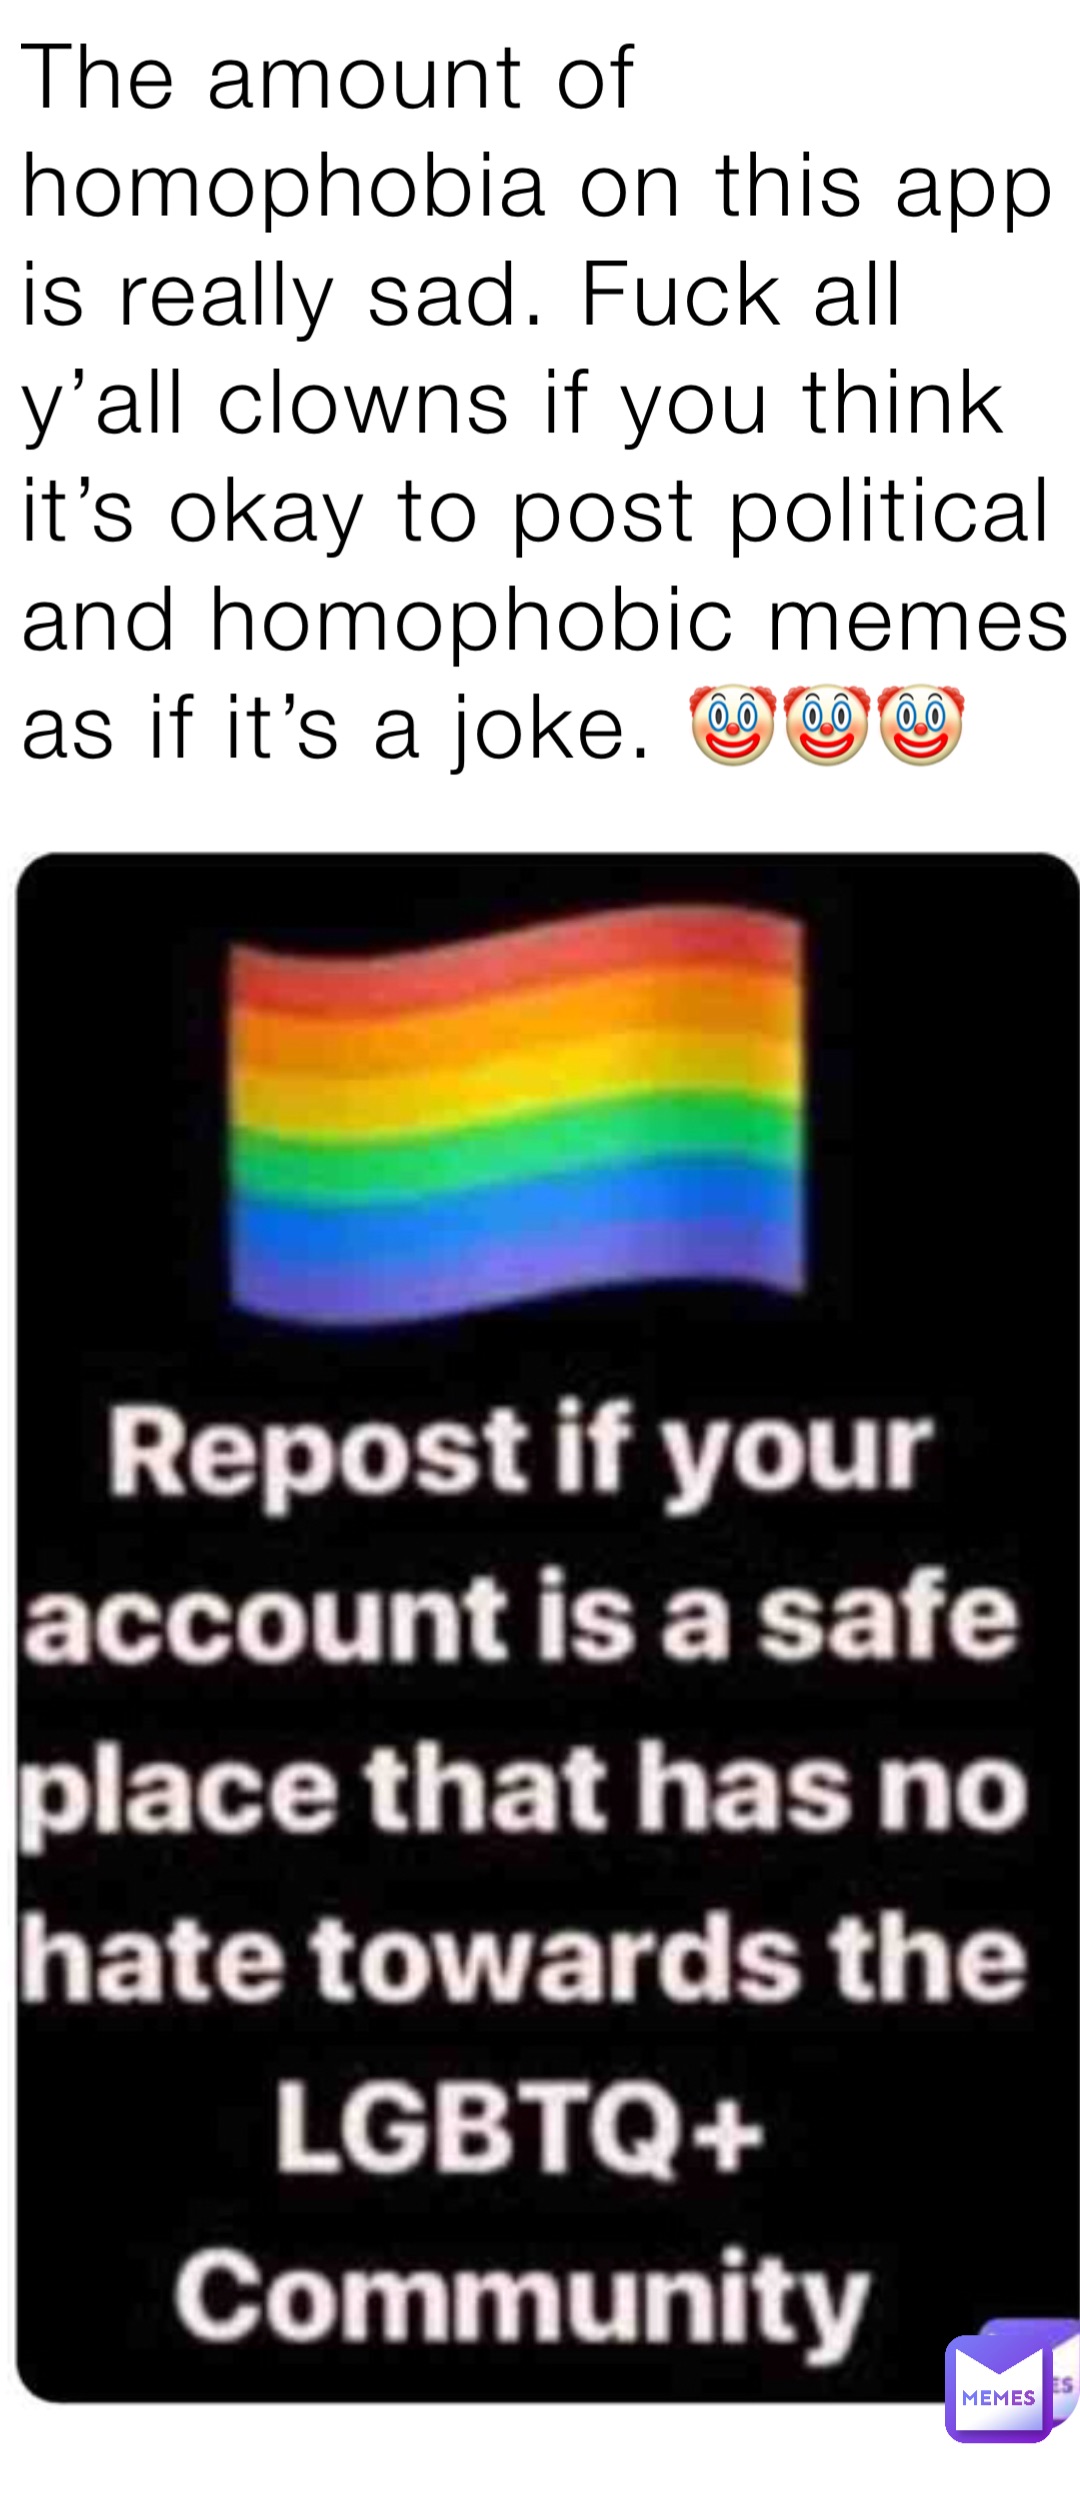 The amount of homophobia on this app is really sad. Fuck all y’all clowns if you think it’s okay to post political and homophobic memes as if it’s a joke. 🤡🤡🤡